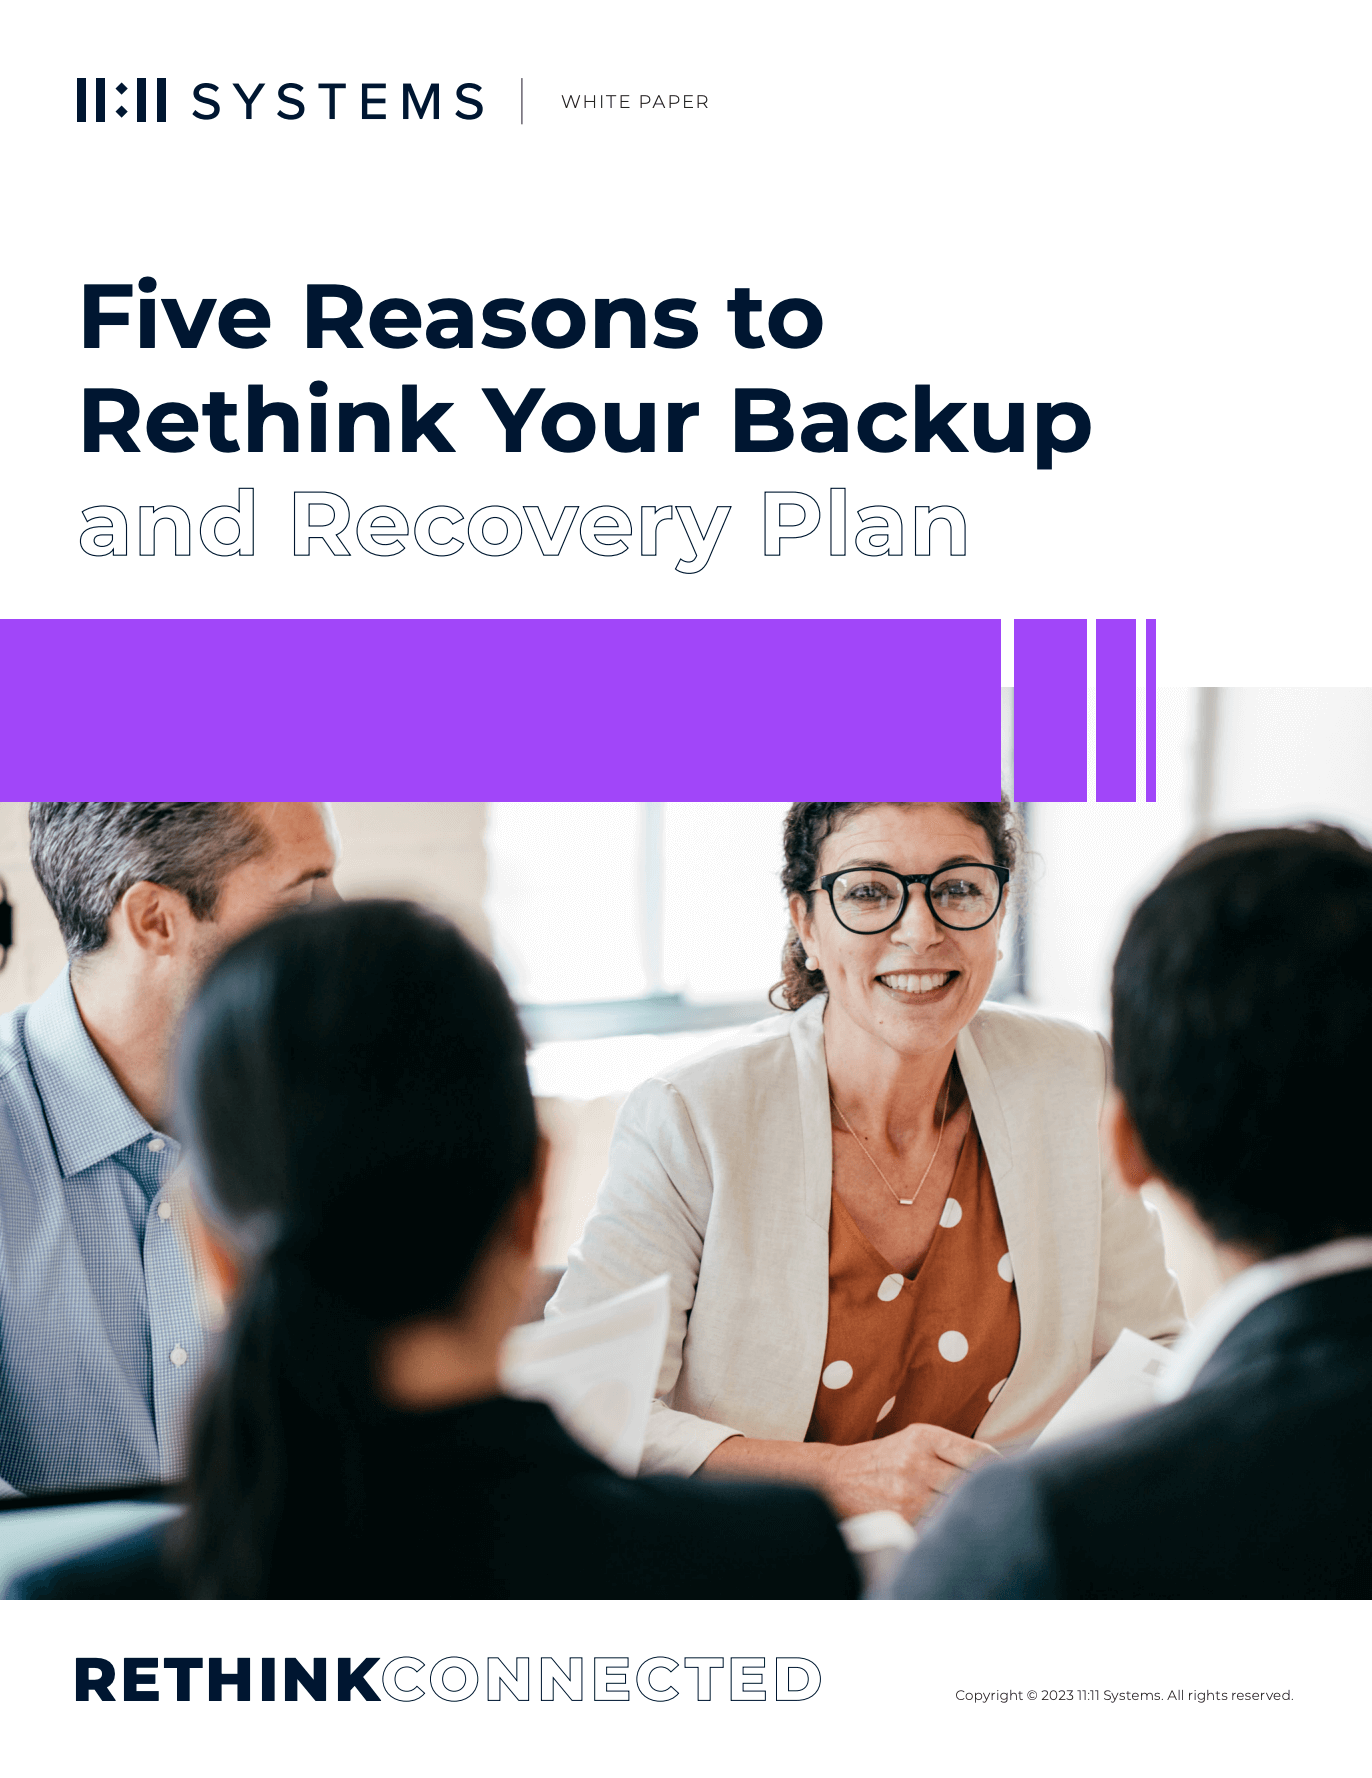 Five Reasons to Rethink Your Backup and Recovery Plan